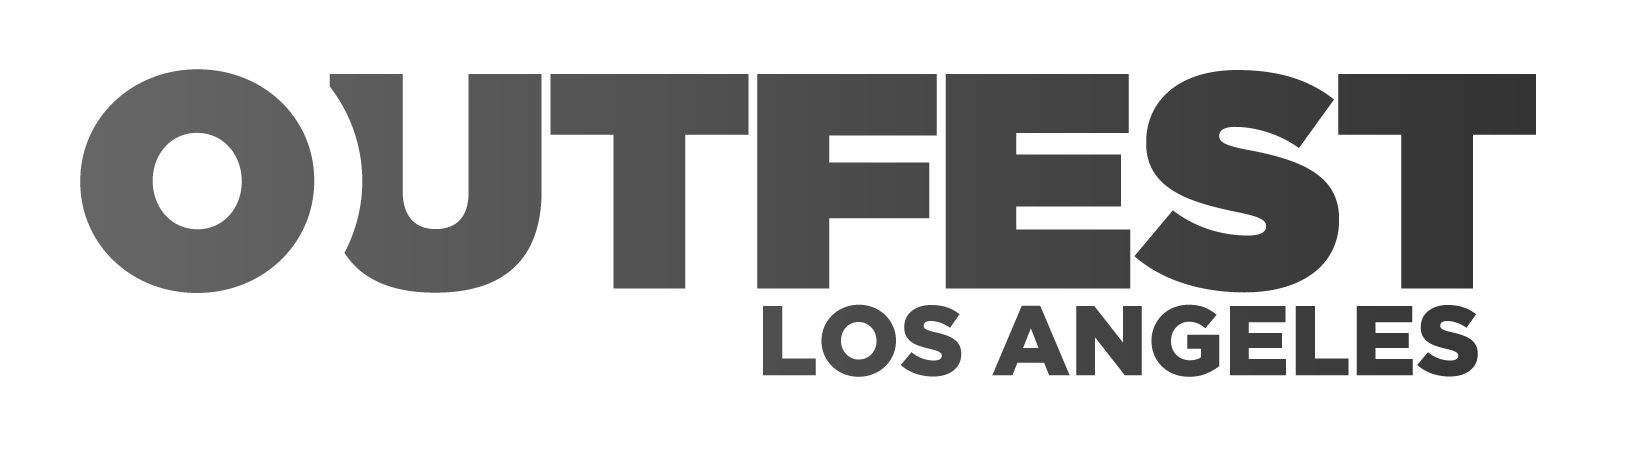 OutfestLogo_Slate.png